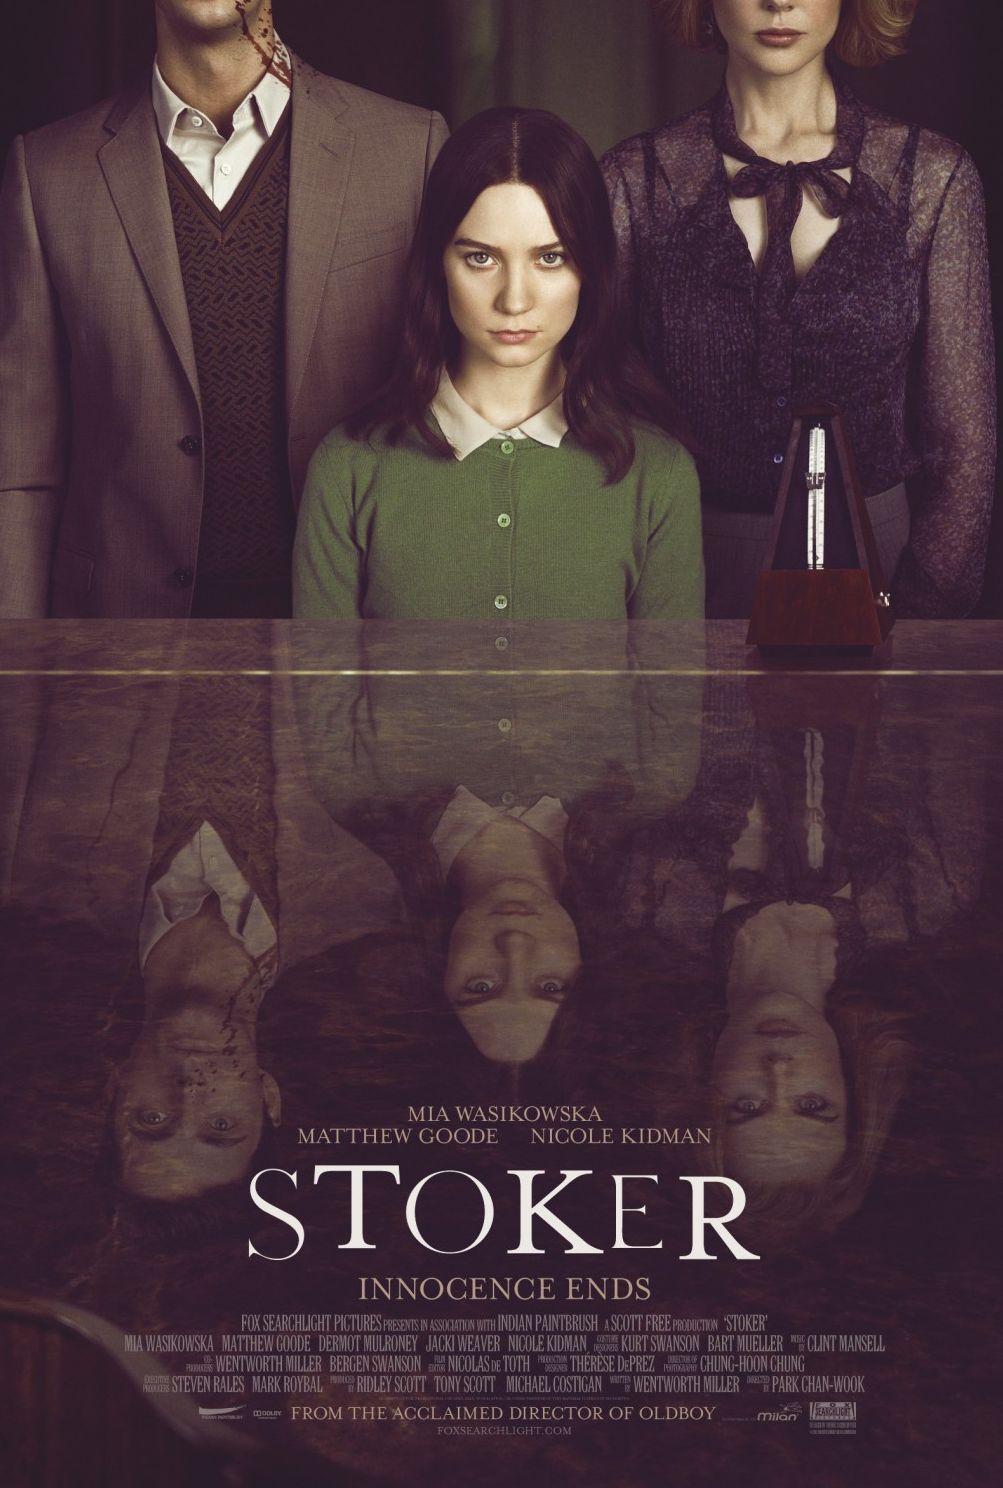 Best Posters Of 2013: Stoker